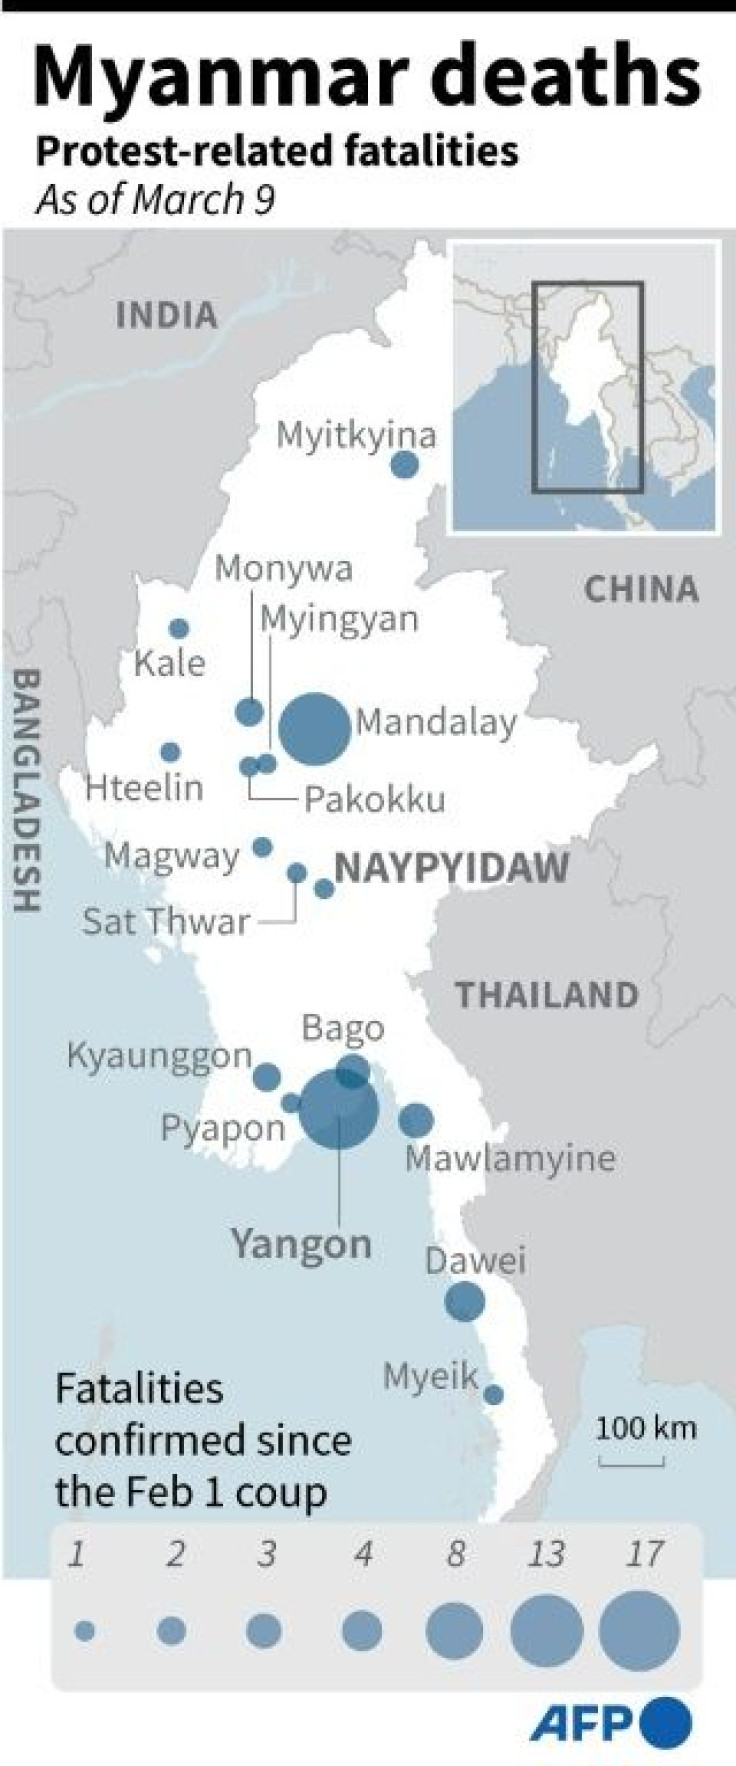 Map of Myanmar showing the cities where protest-related fatalities have been reported since the junta takeover on February 1.